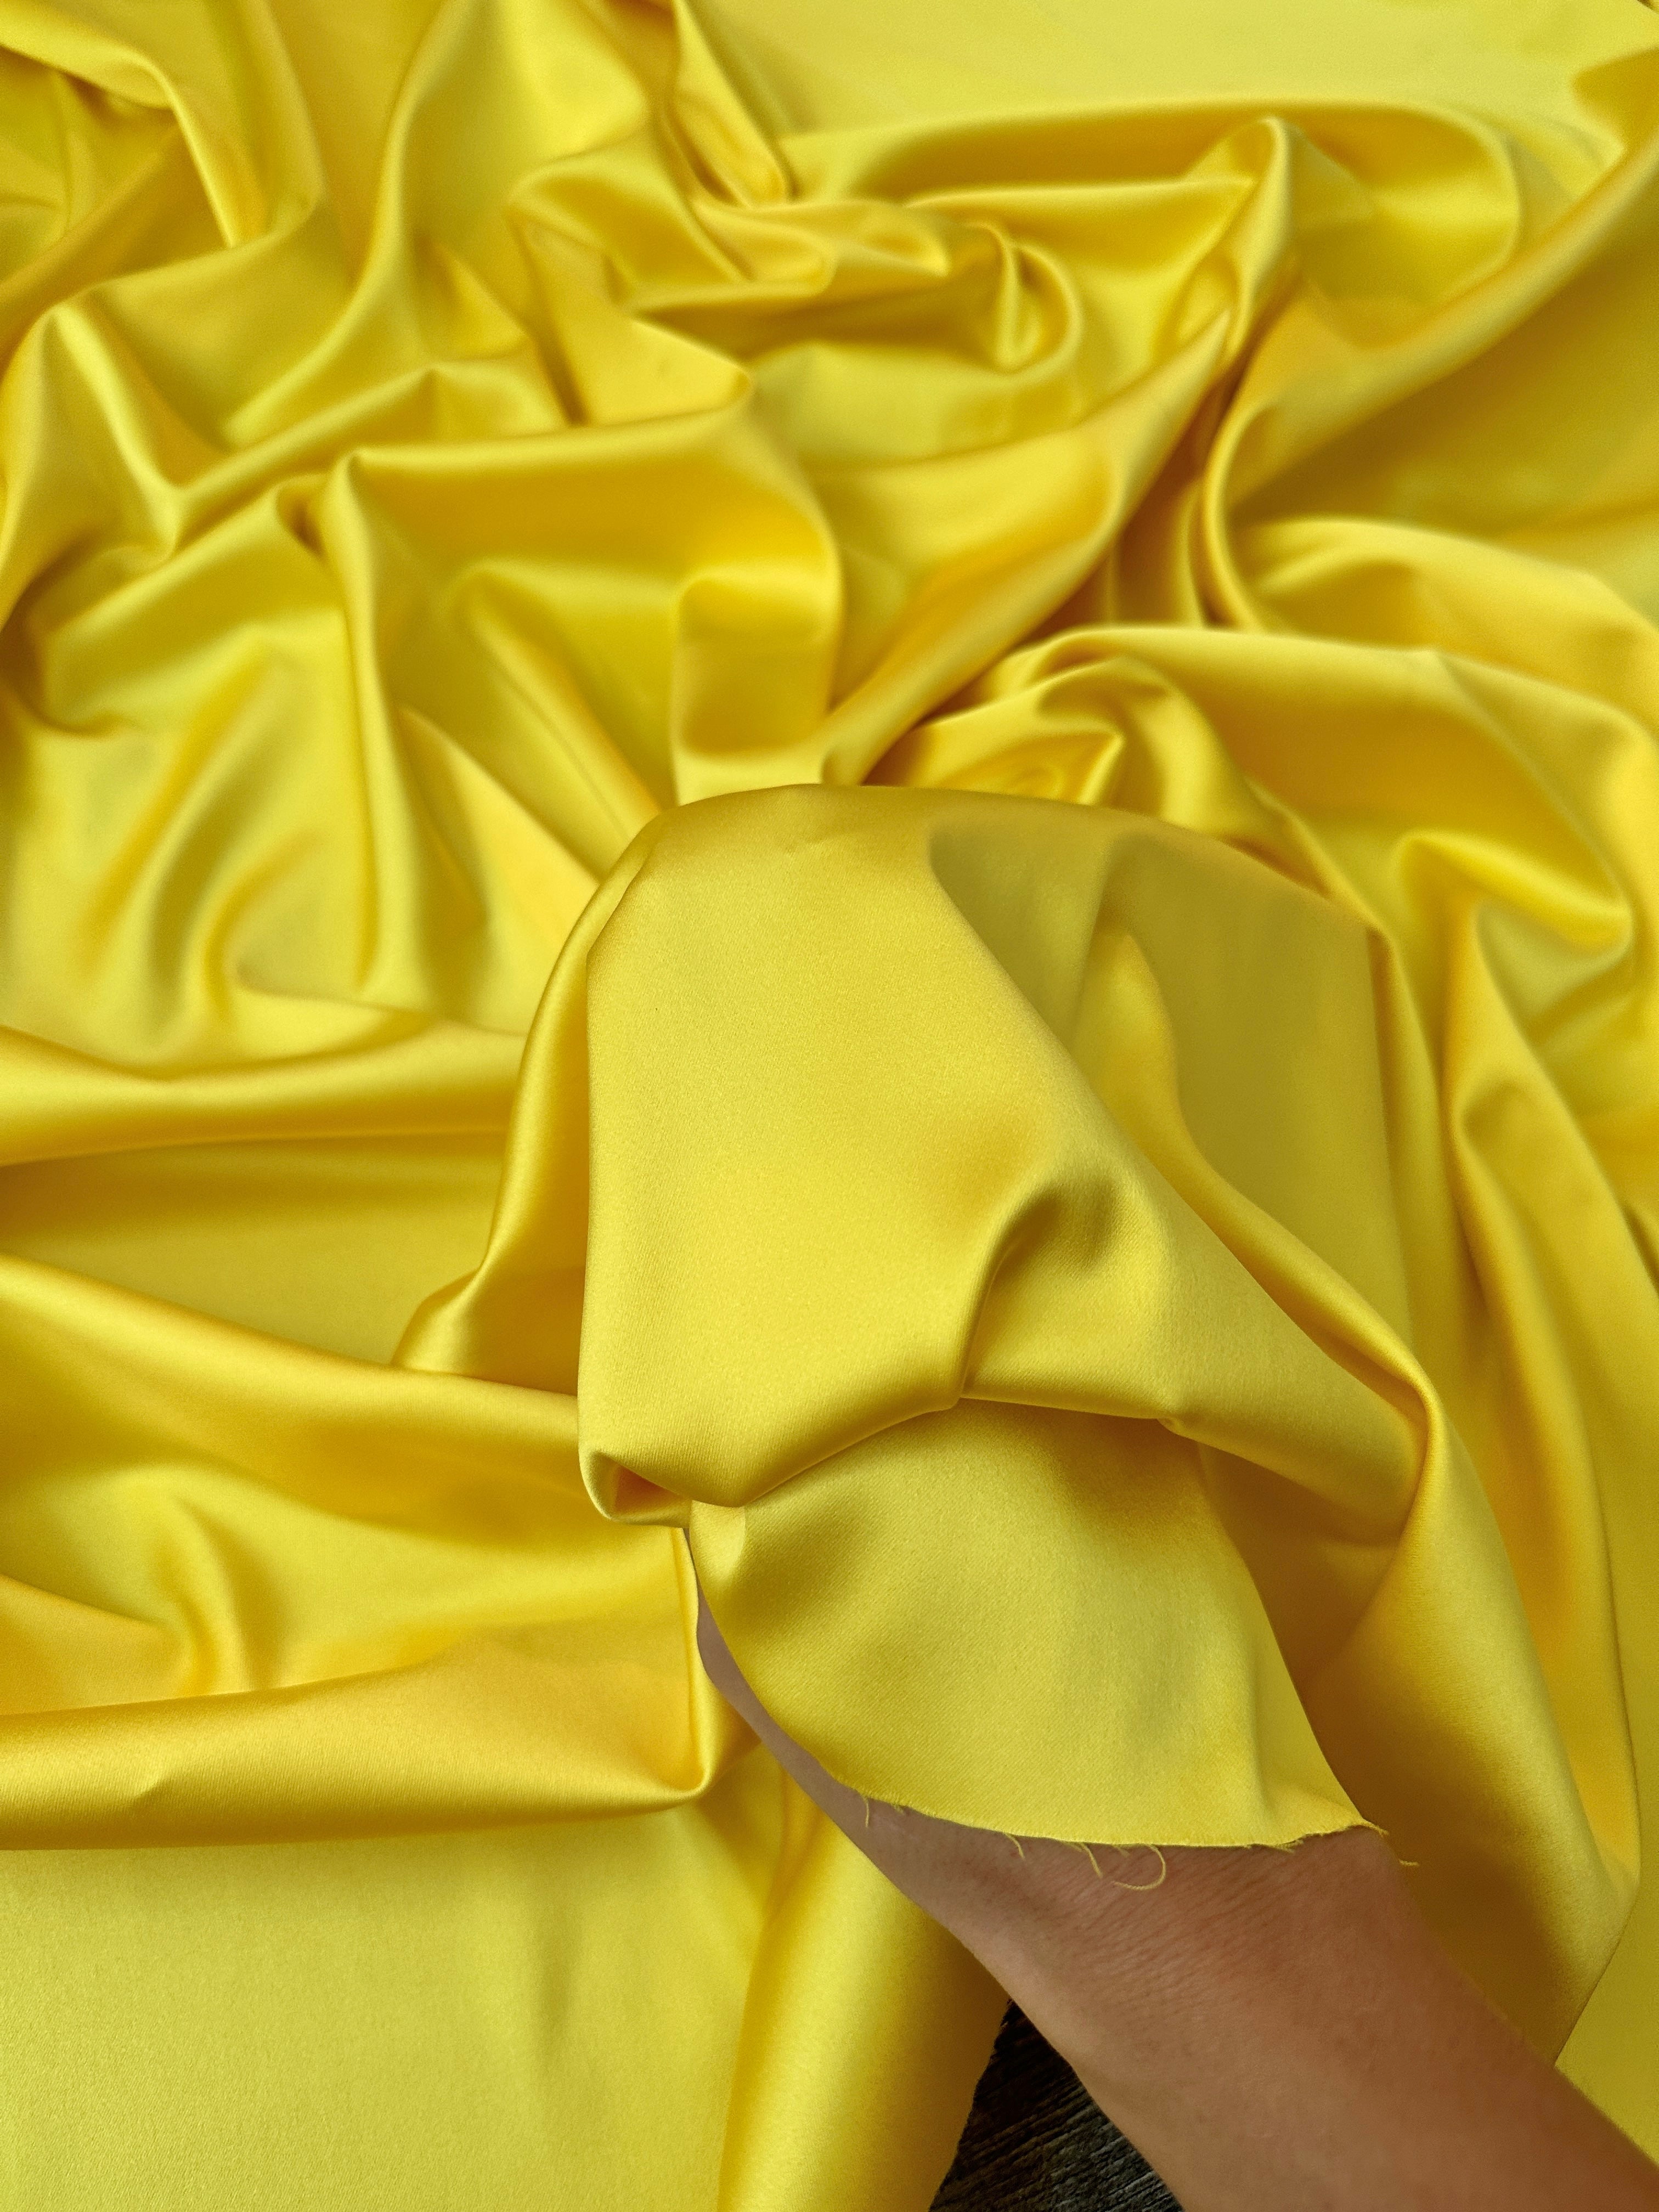  yellow stretch crepe back satin, light yellow stretch crepe back satin, dark yellow stretch crepe back satin, premium stretch crepe back satin, satin for bride, satin for woman, satin in low price, cheap satin, satin on sale